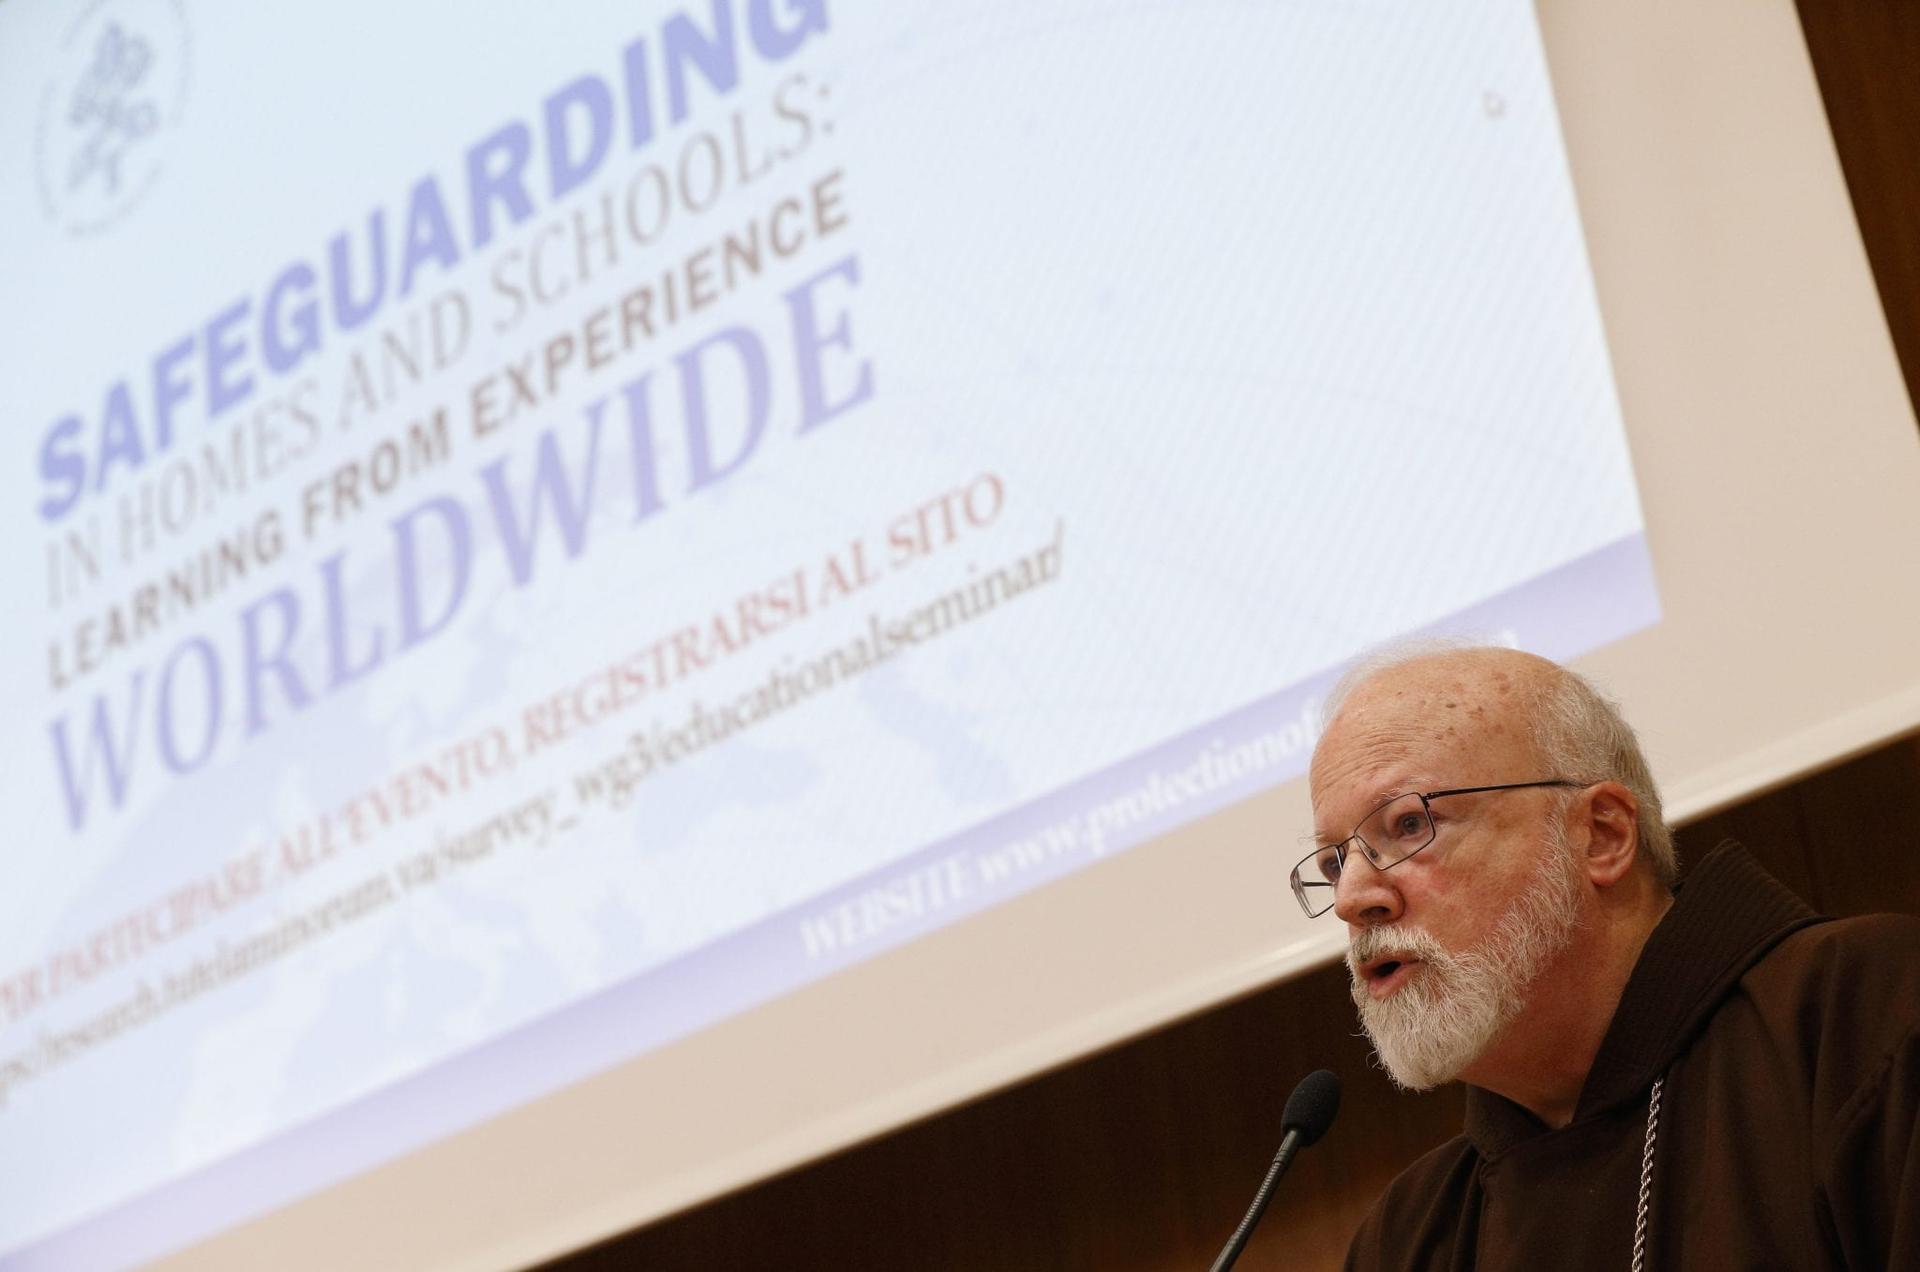 Cardinal O’Malley defends Pope Francis on anti-abuse fight